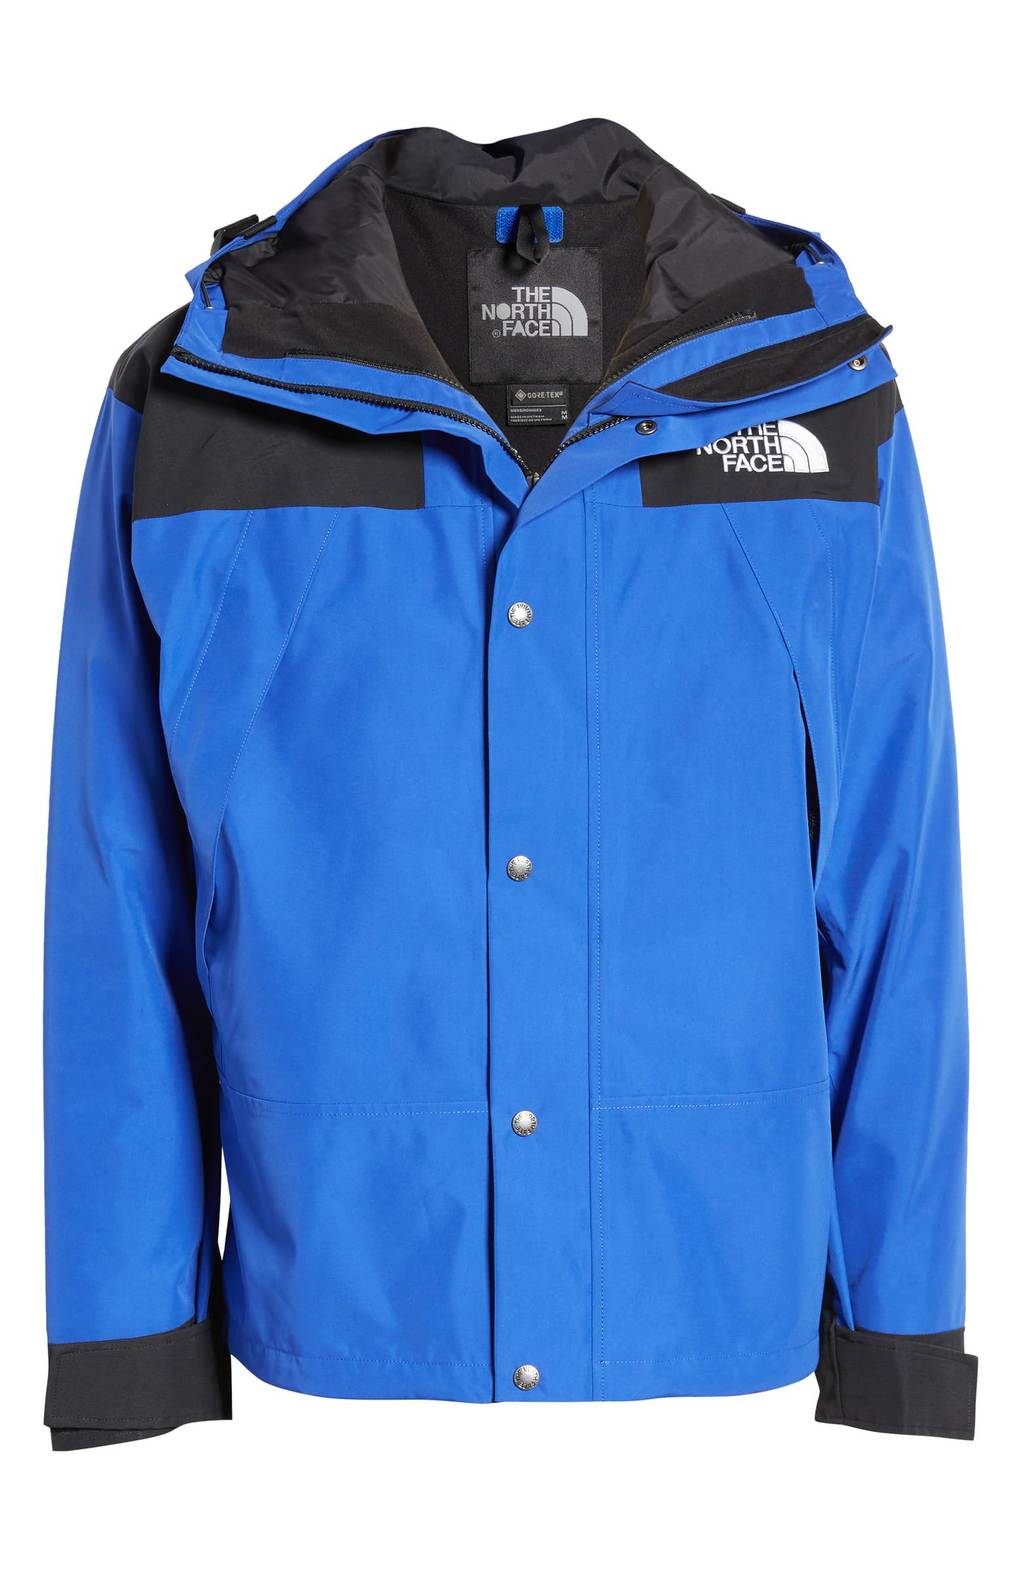 The North Face 1990 Mountain Gore-Tex® Jackets On Sale For 40% Off